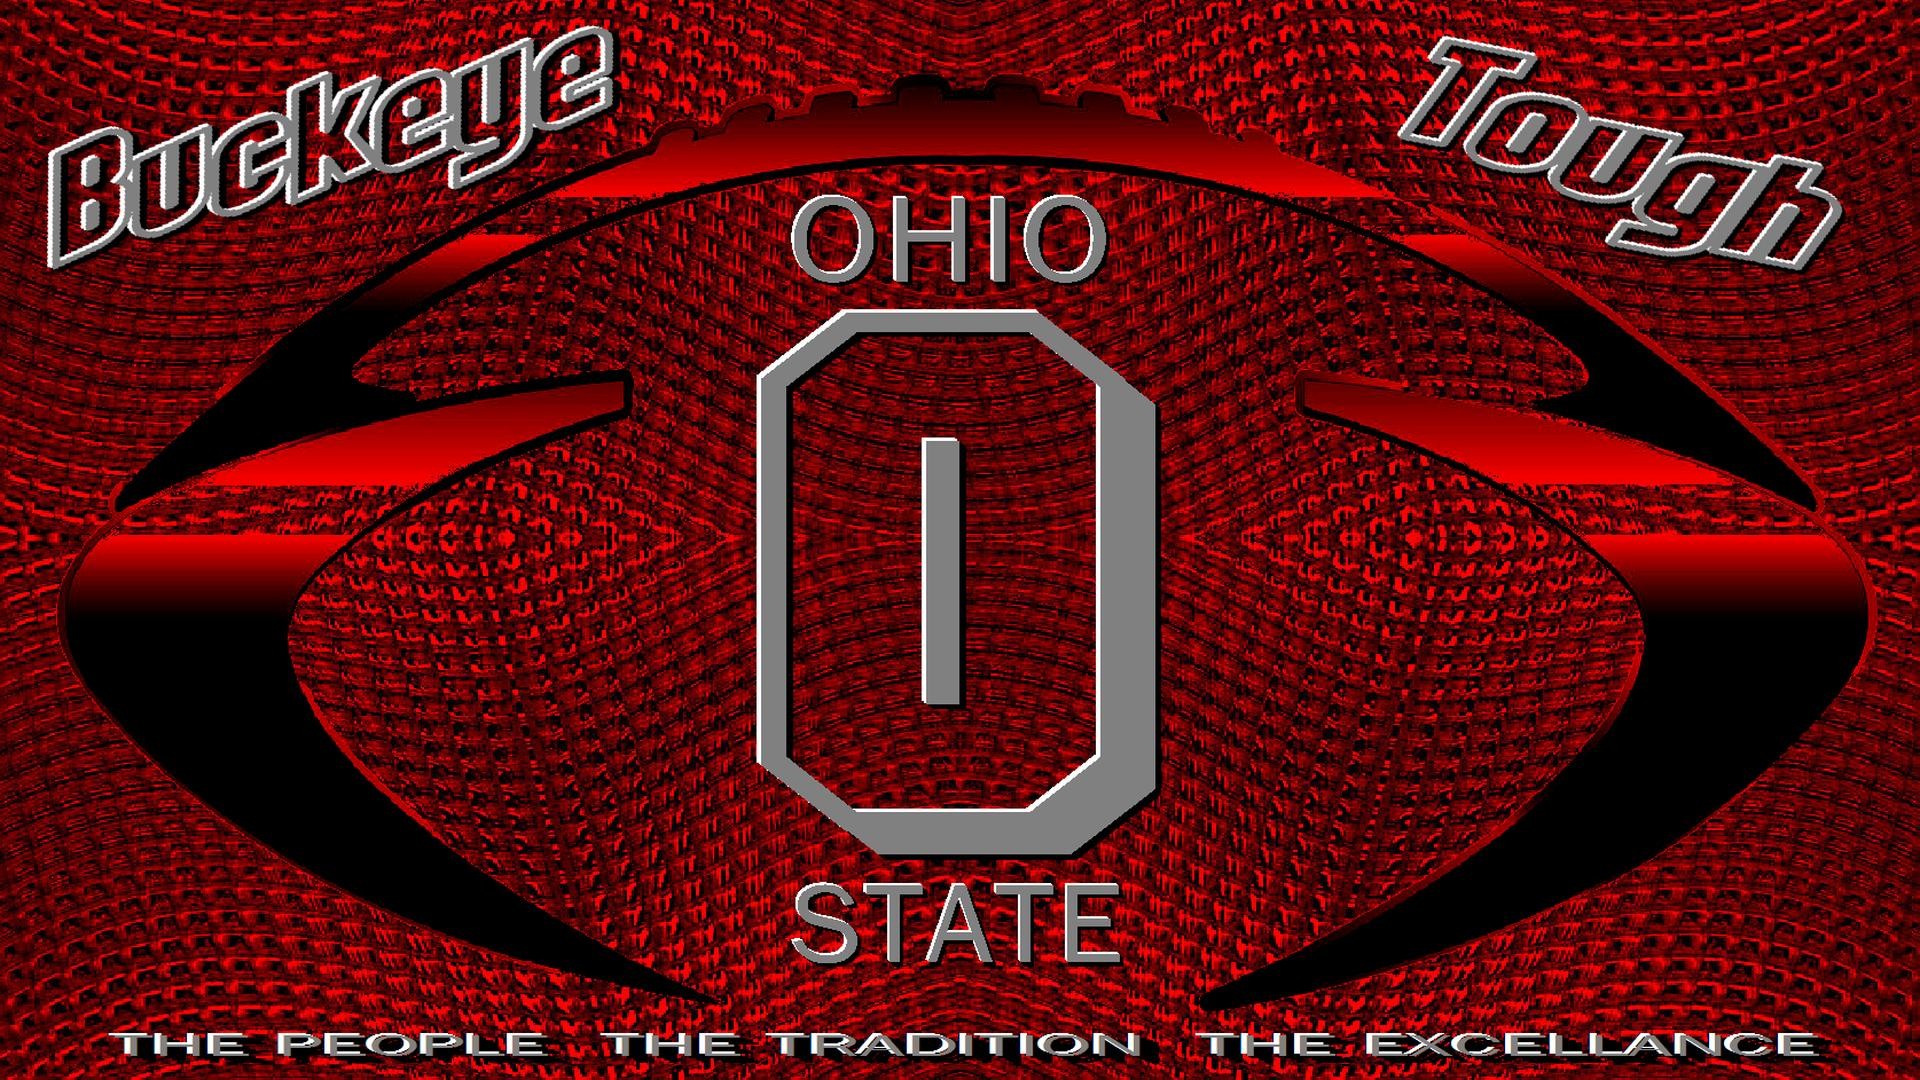 best images about OHIO STATE PHONE WALLPAPERS on Pinterest